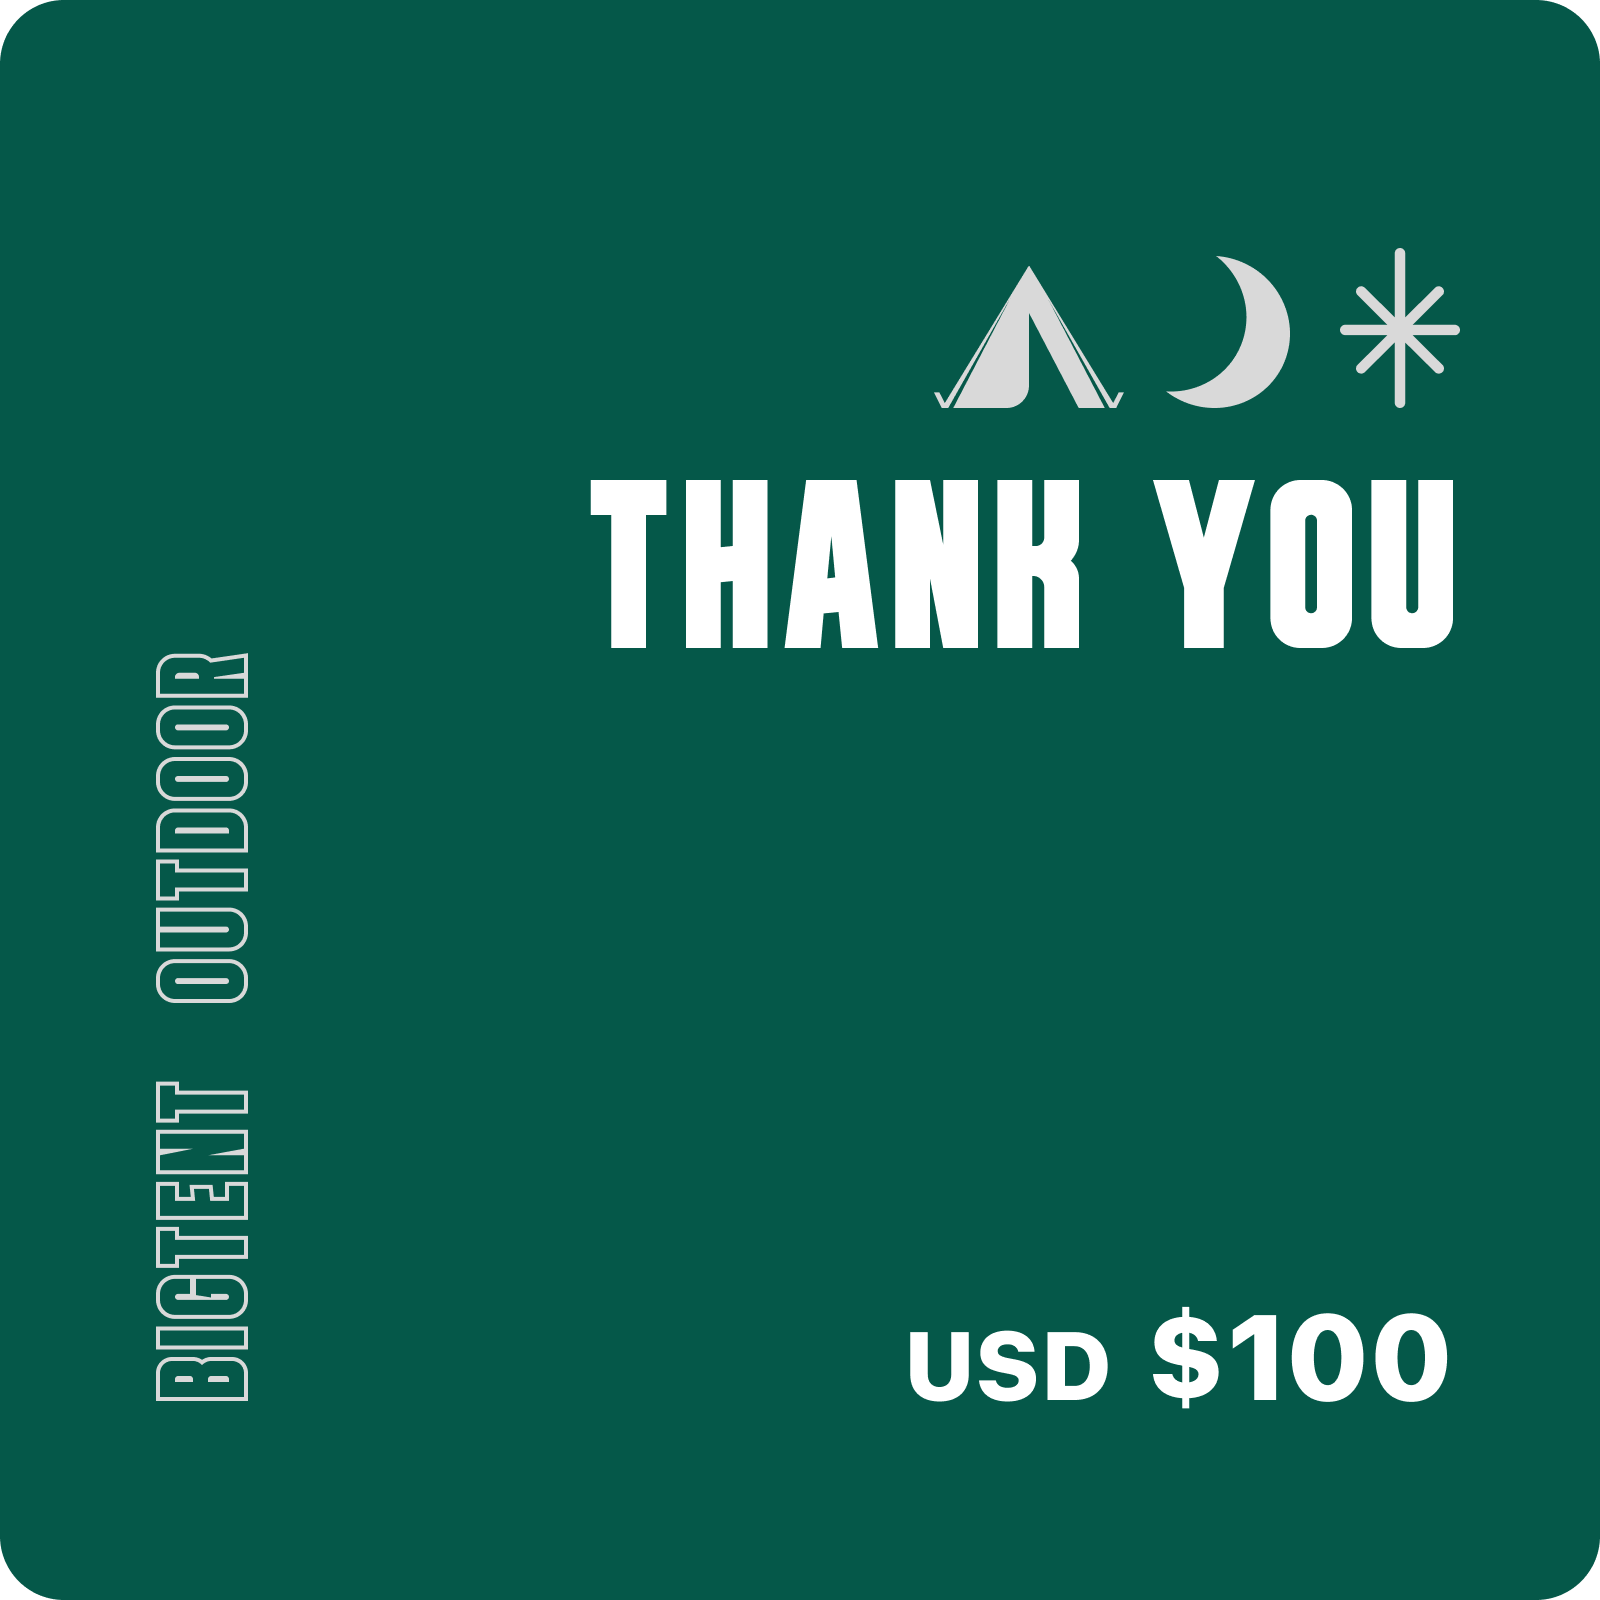 bigtent giftcard $100 usd